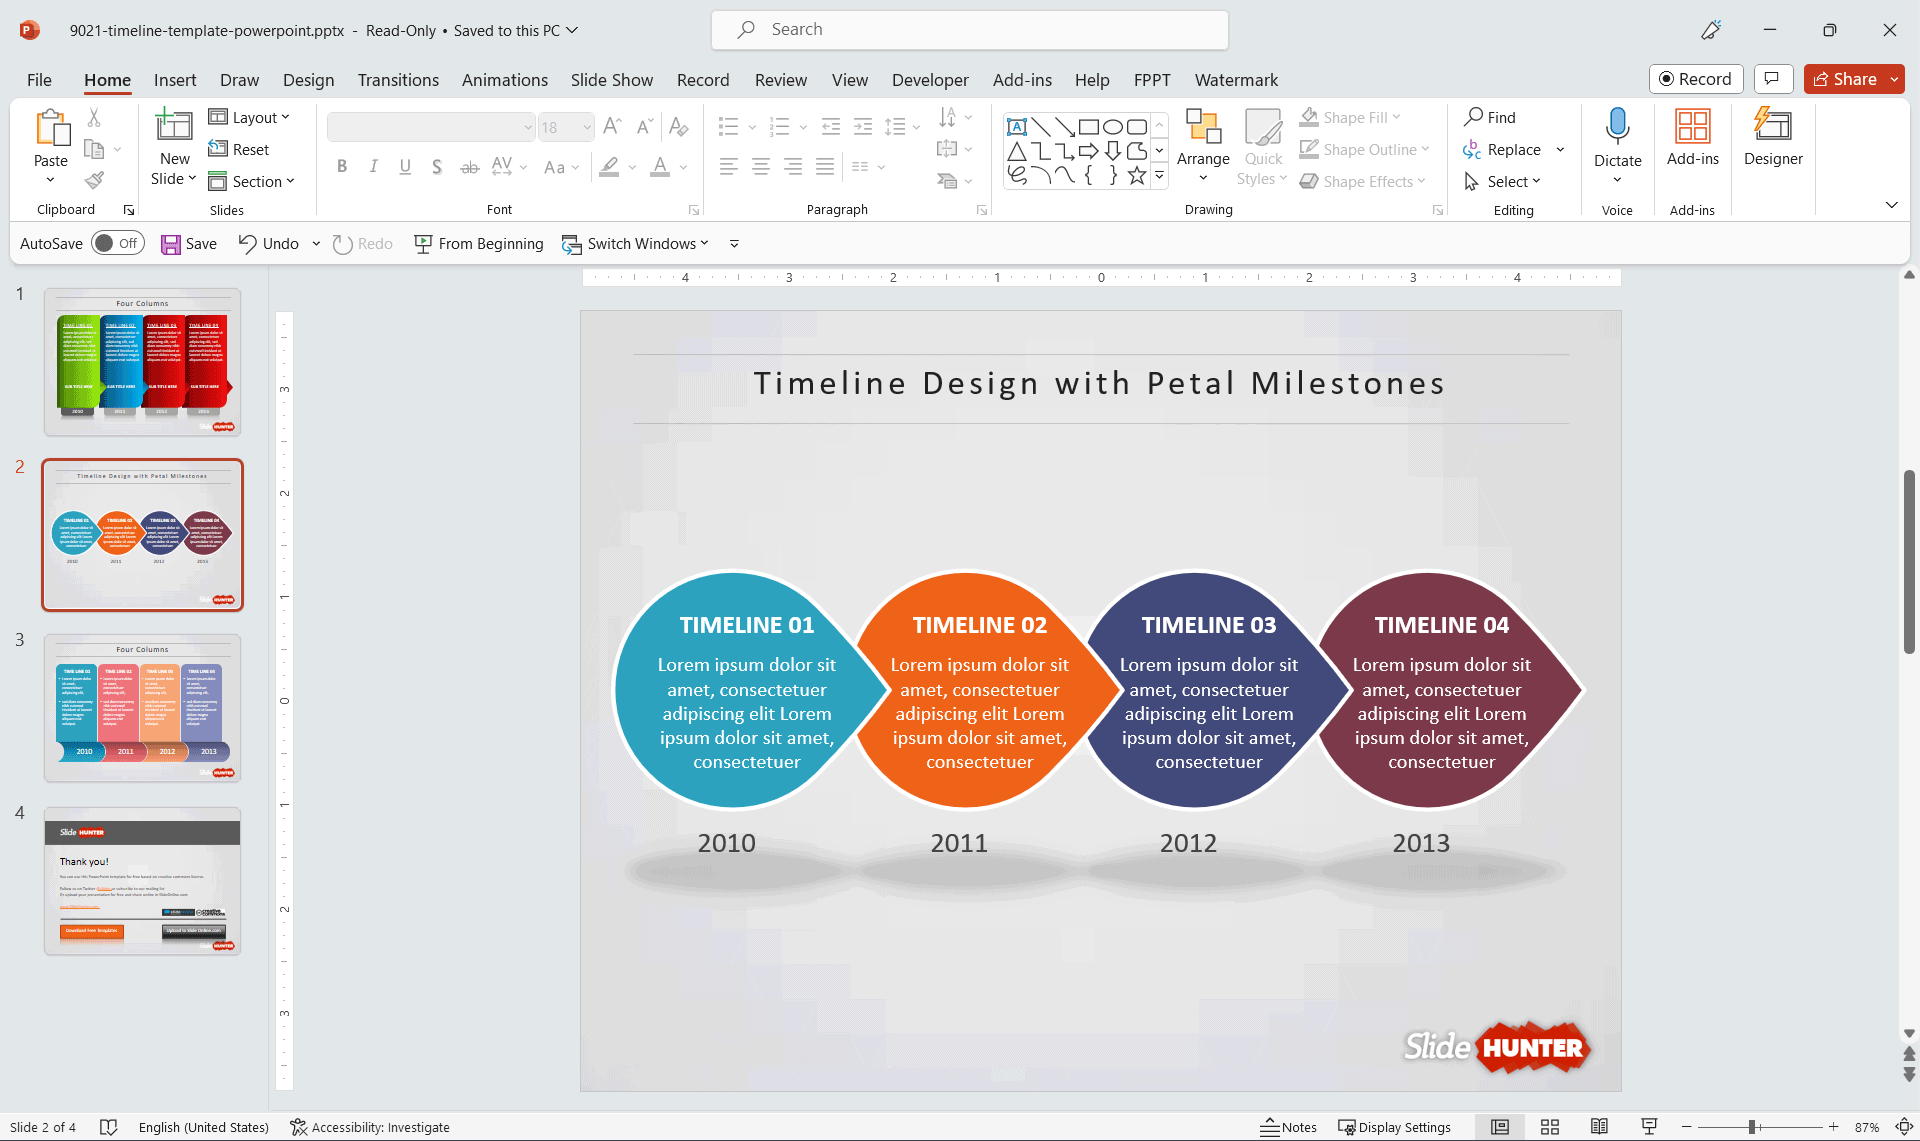 Creative Timeline Design for PowerPoint